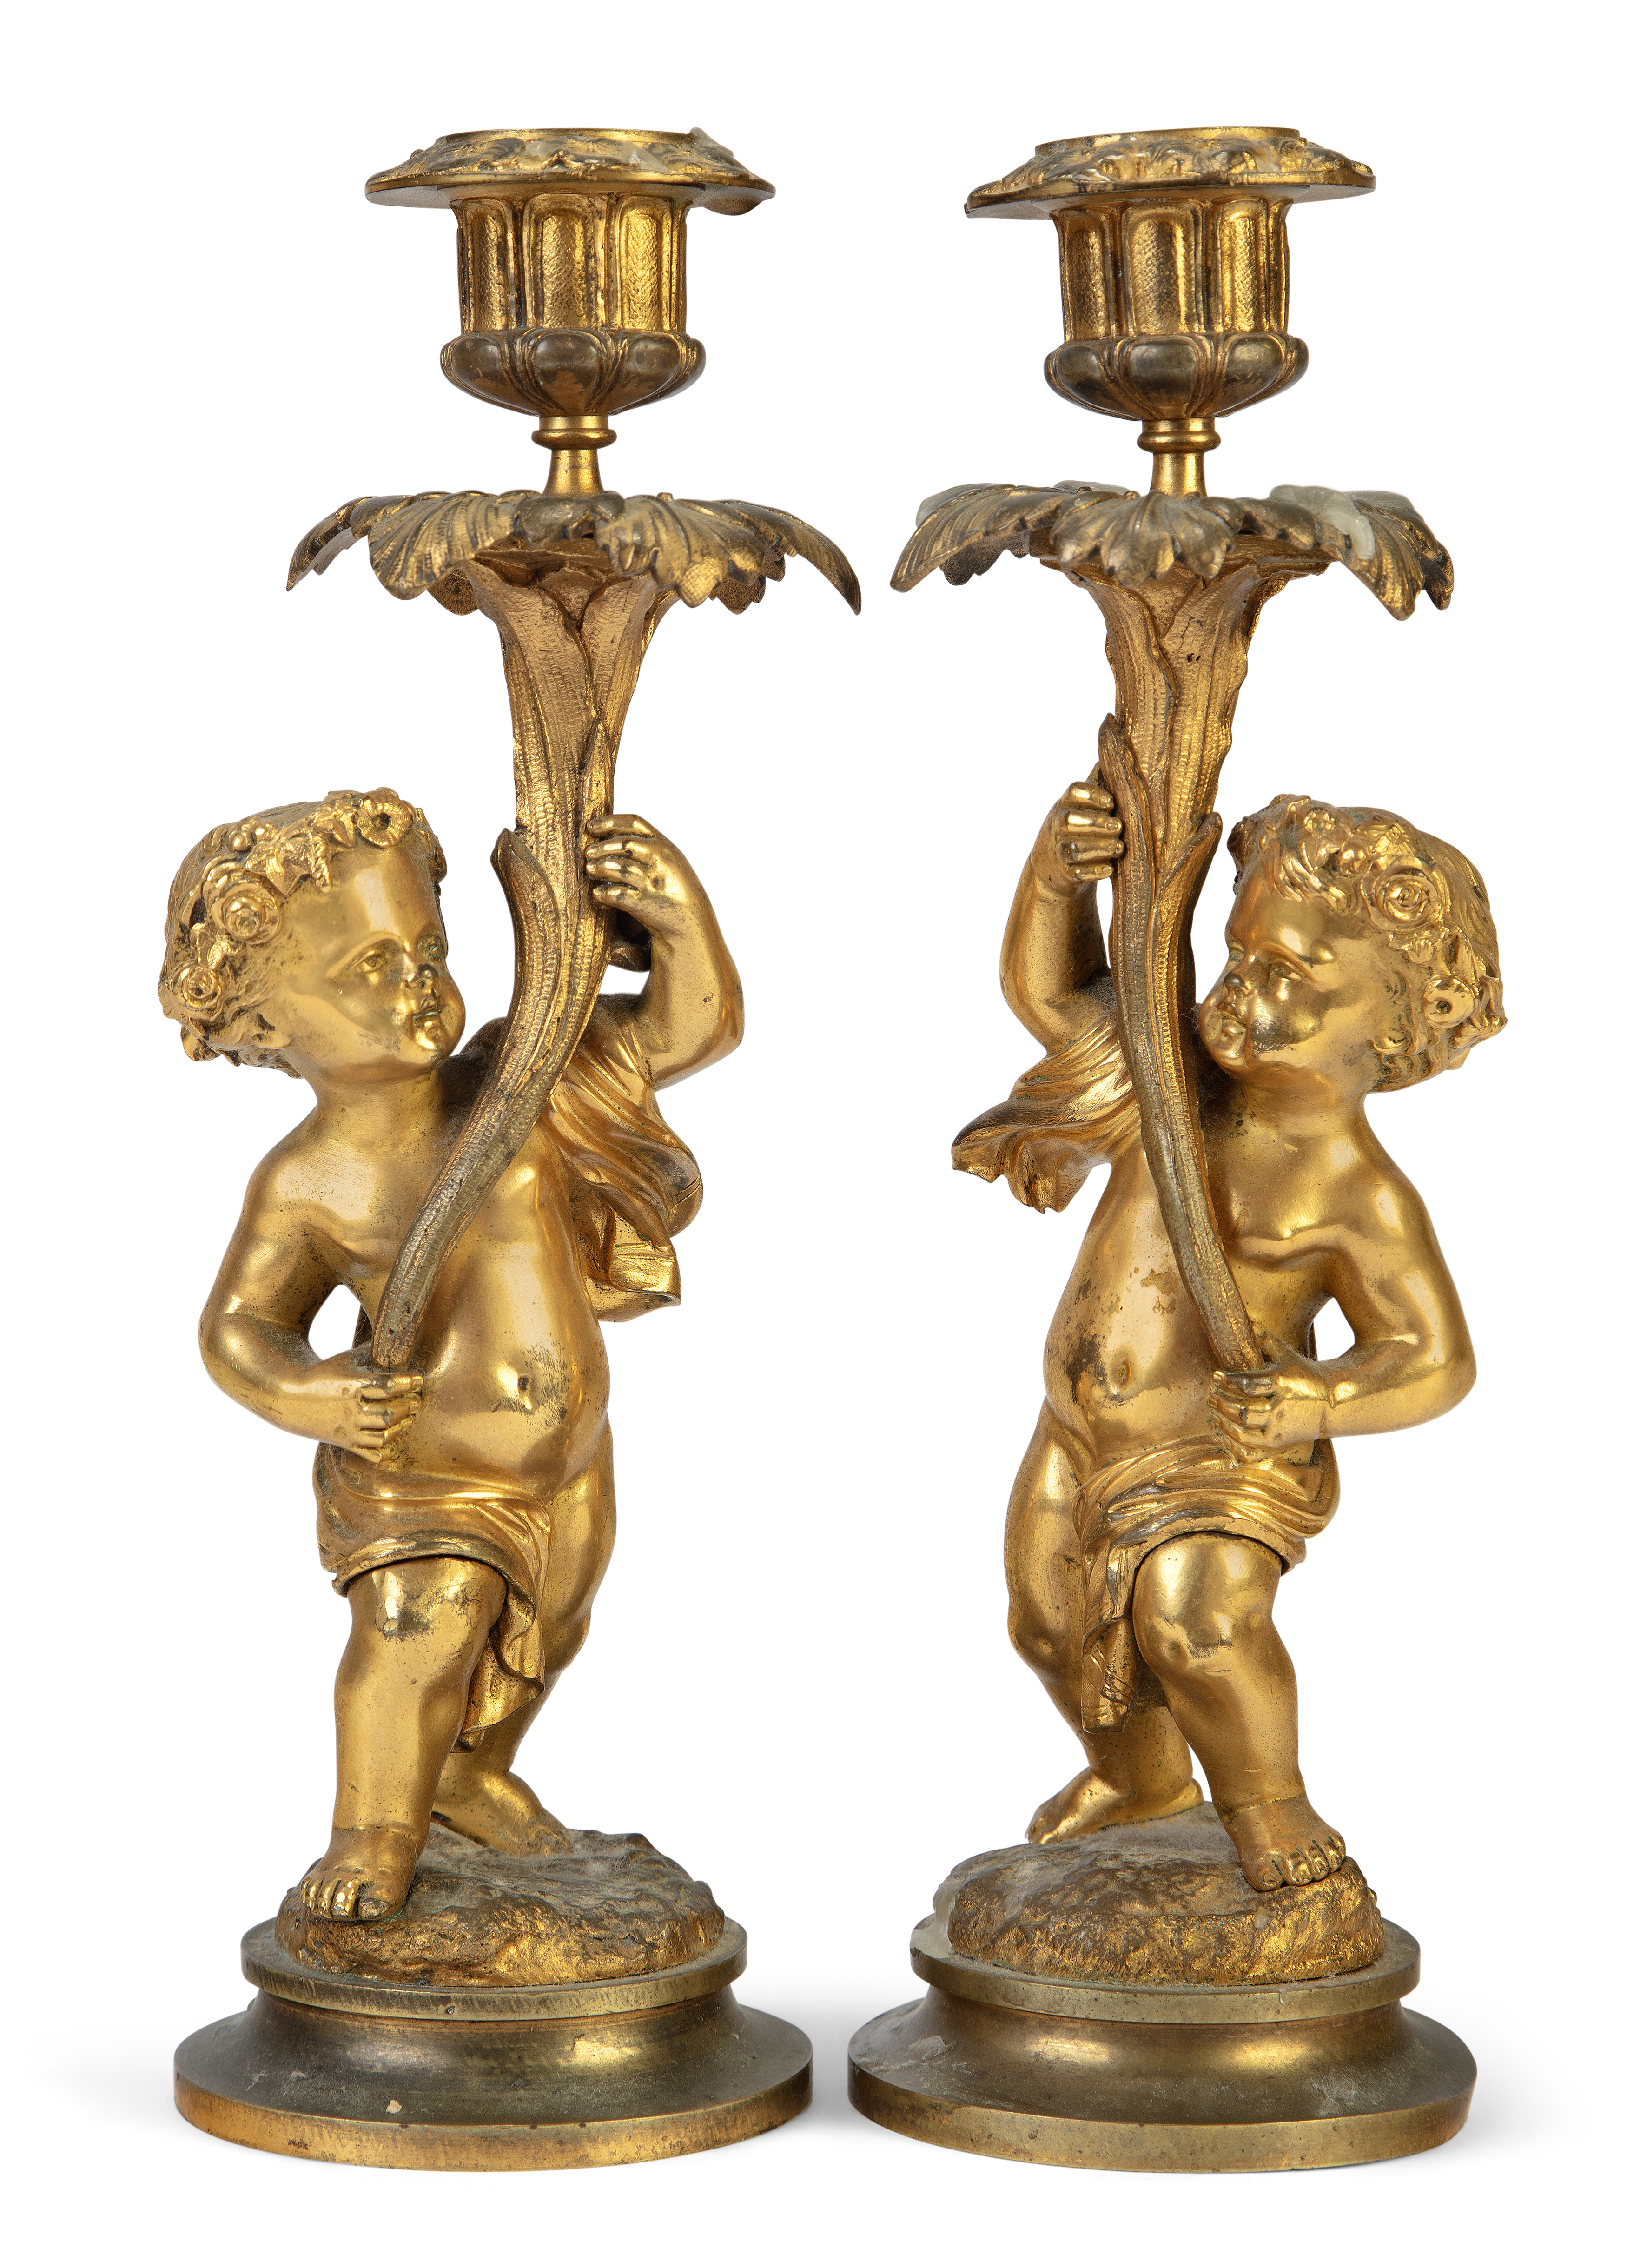 A pair of French gilt-bronze figural candlesticks, late 19th century, each modelled as a putto ho...